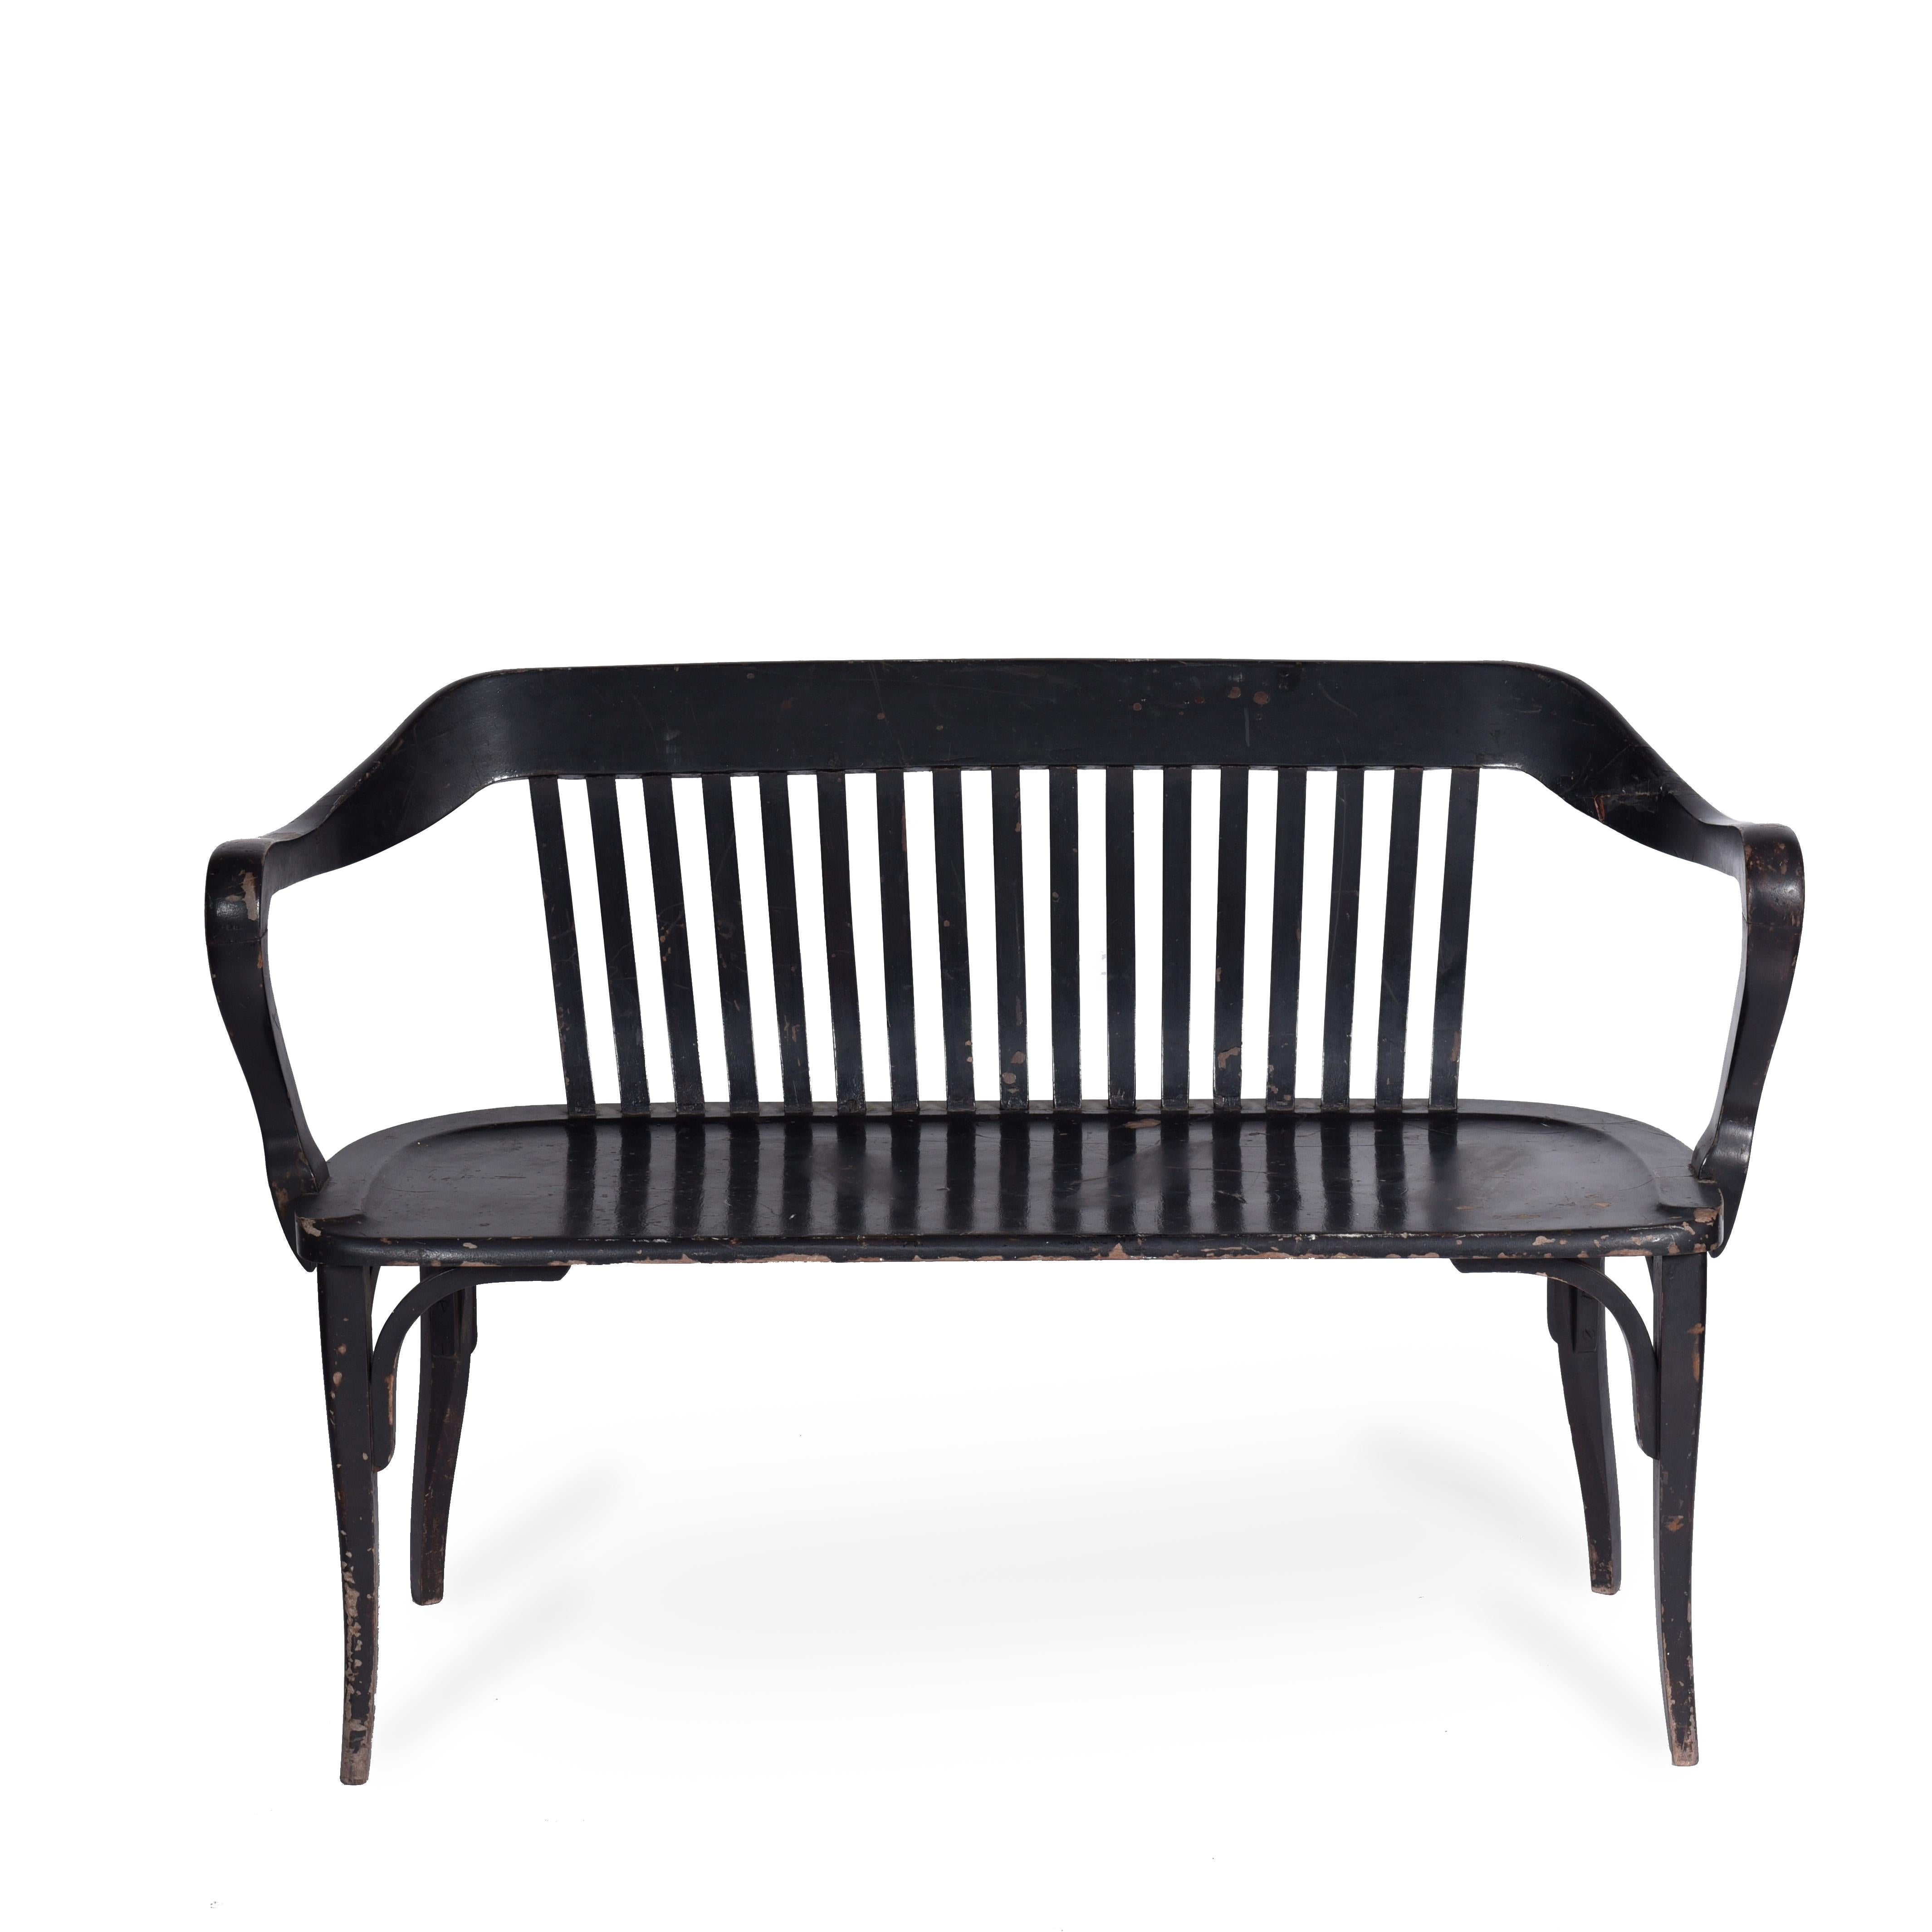 Midcentury Brazilian bench in lacquered wood, 1950s

Of unknown authorship, this bench in wood lacquered in black color is all built in wood. Its back is composed of strips of wood and the arms have been worked manually.